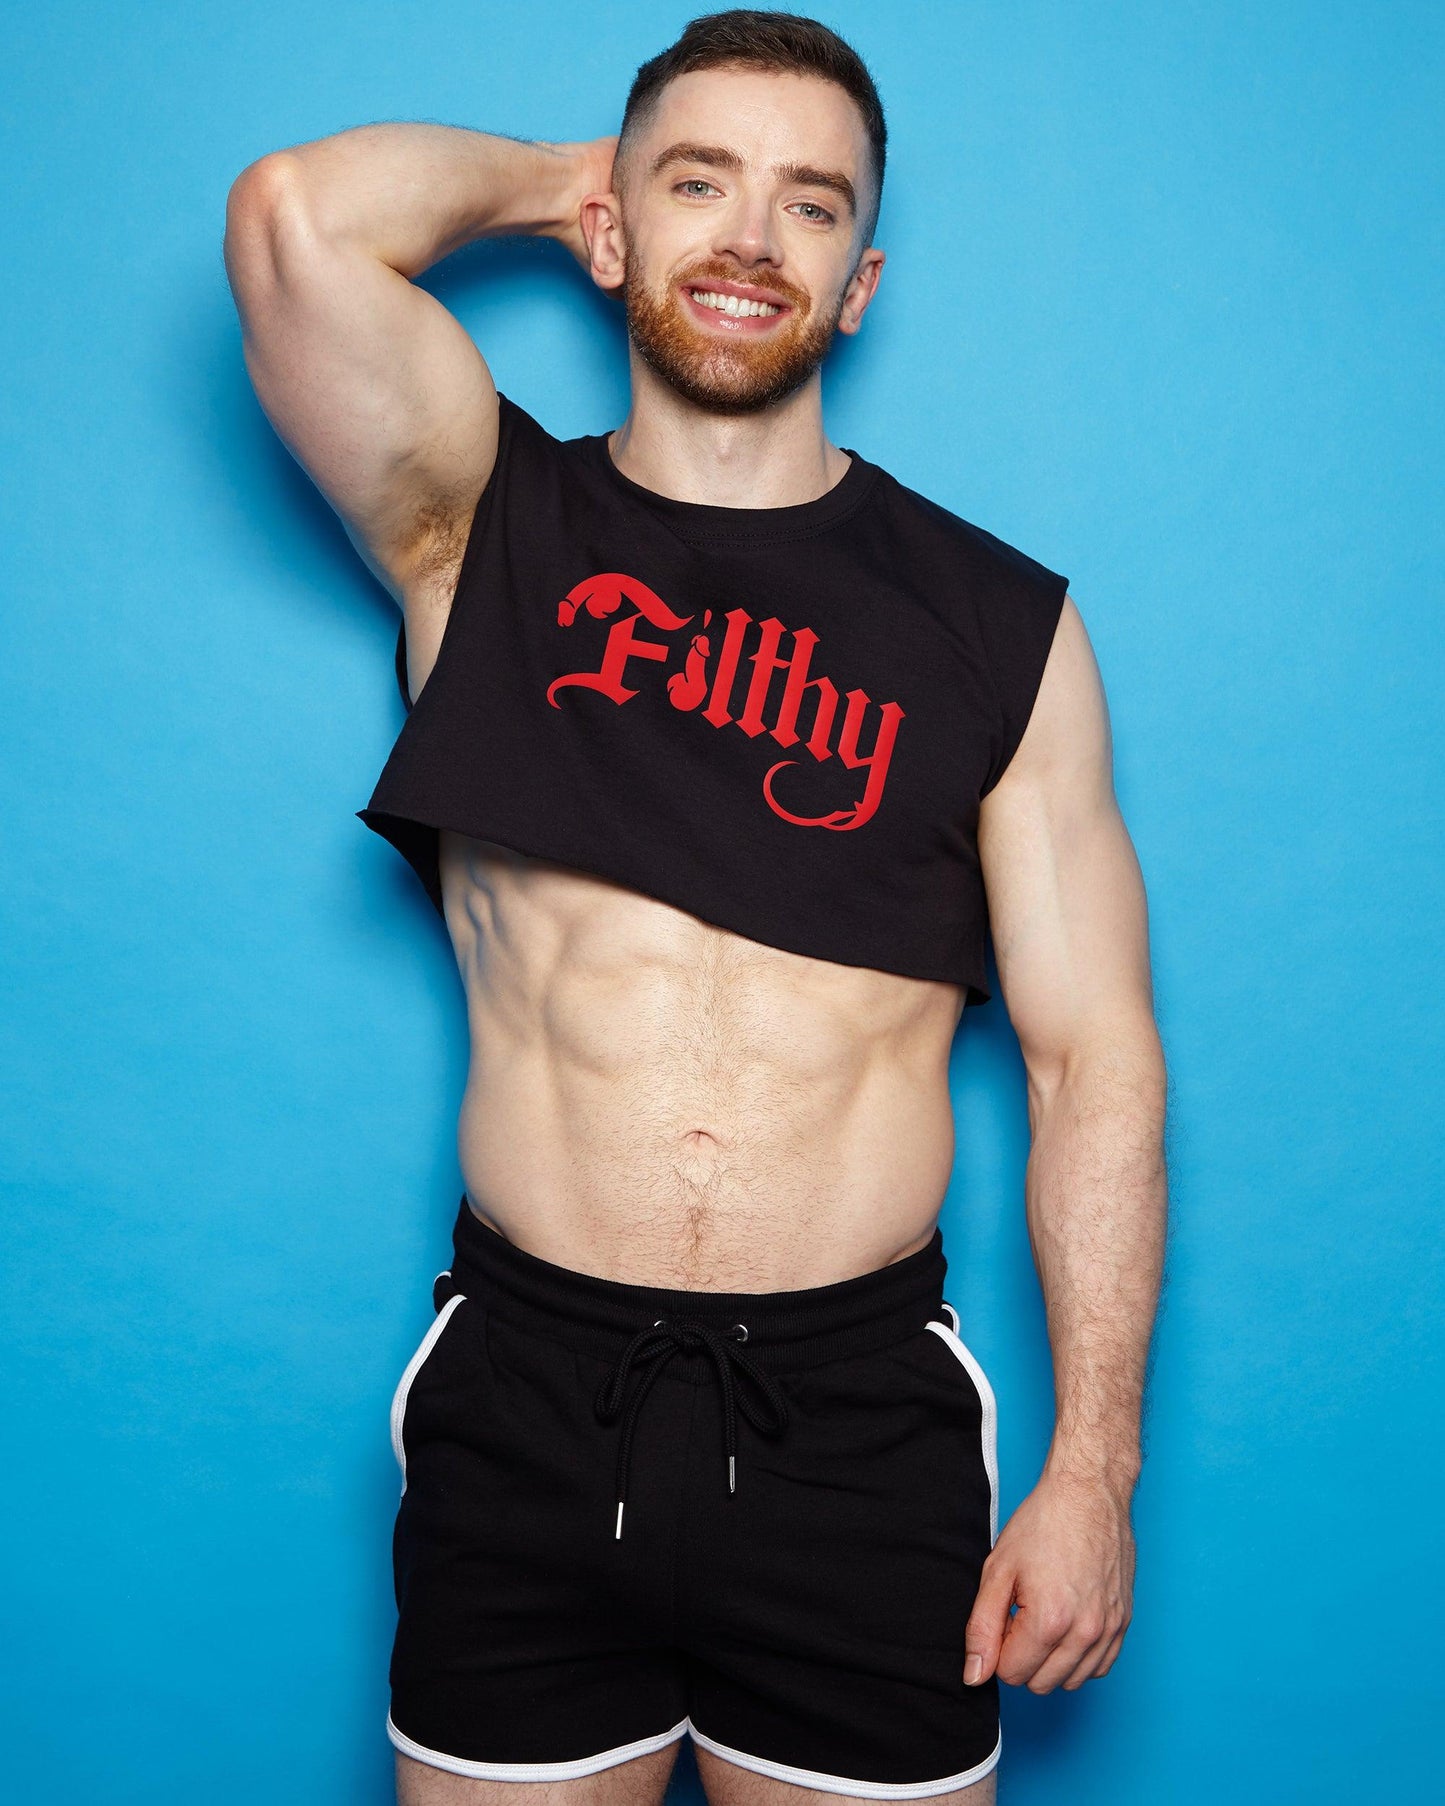 Filthy, red on black - mens sleeveless crop top. - HOMOLONDON